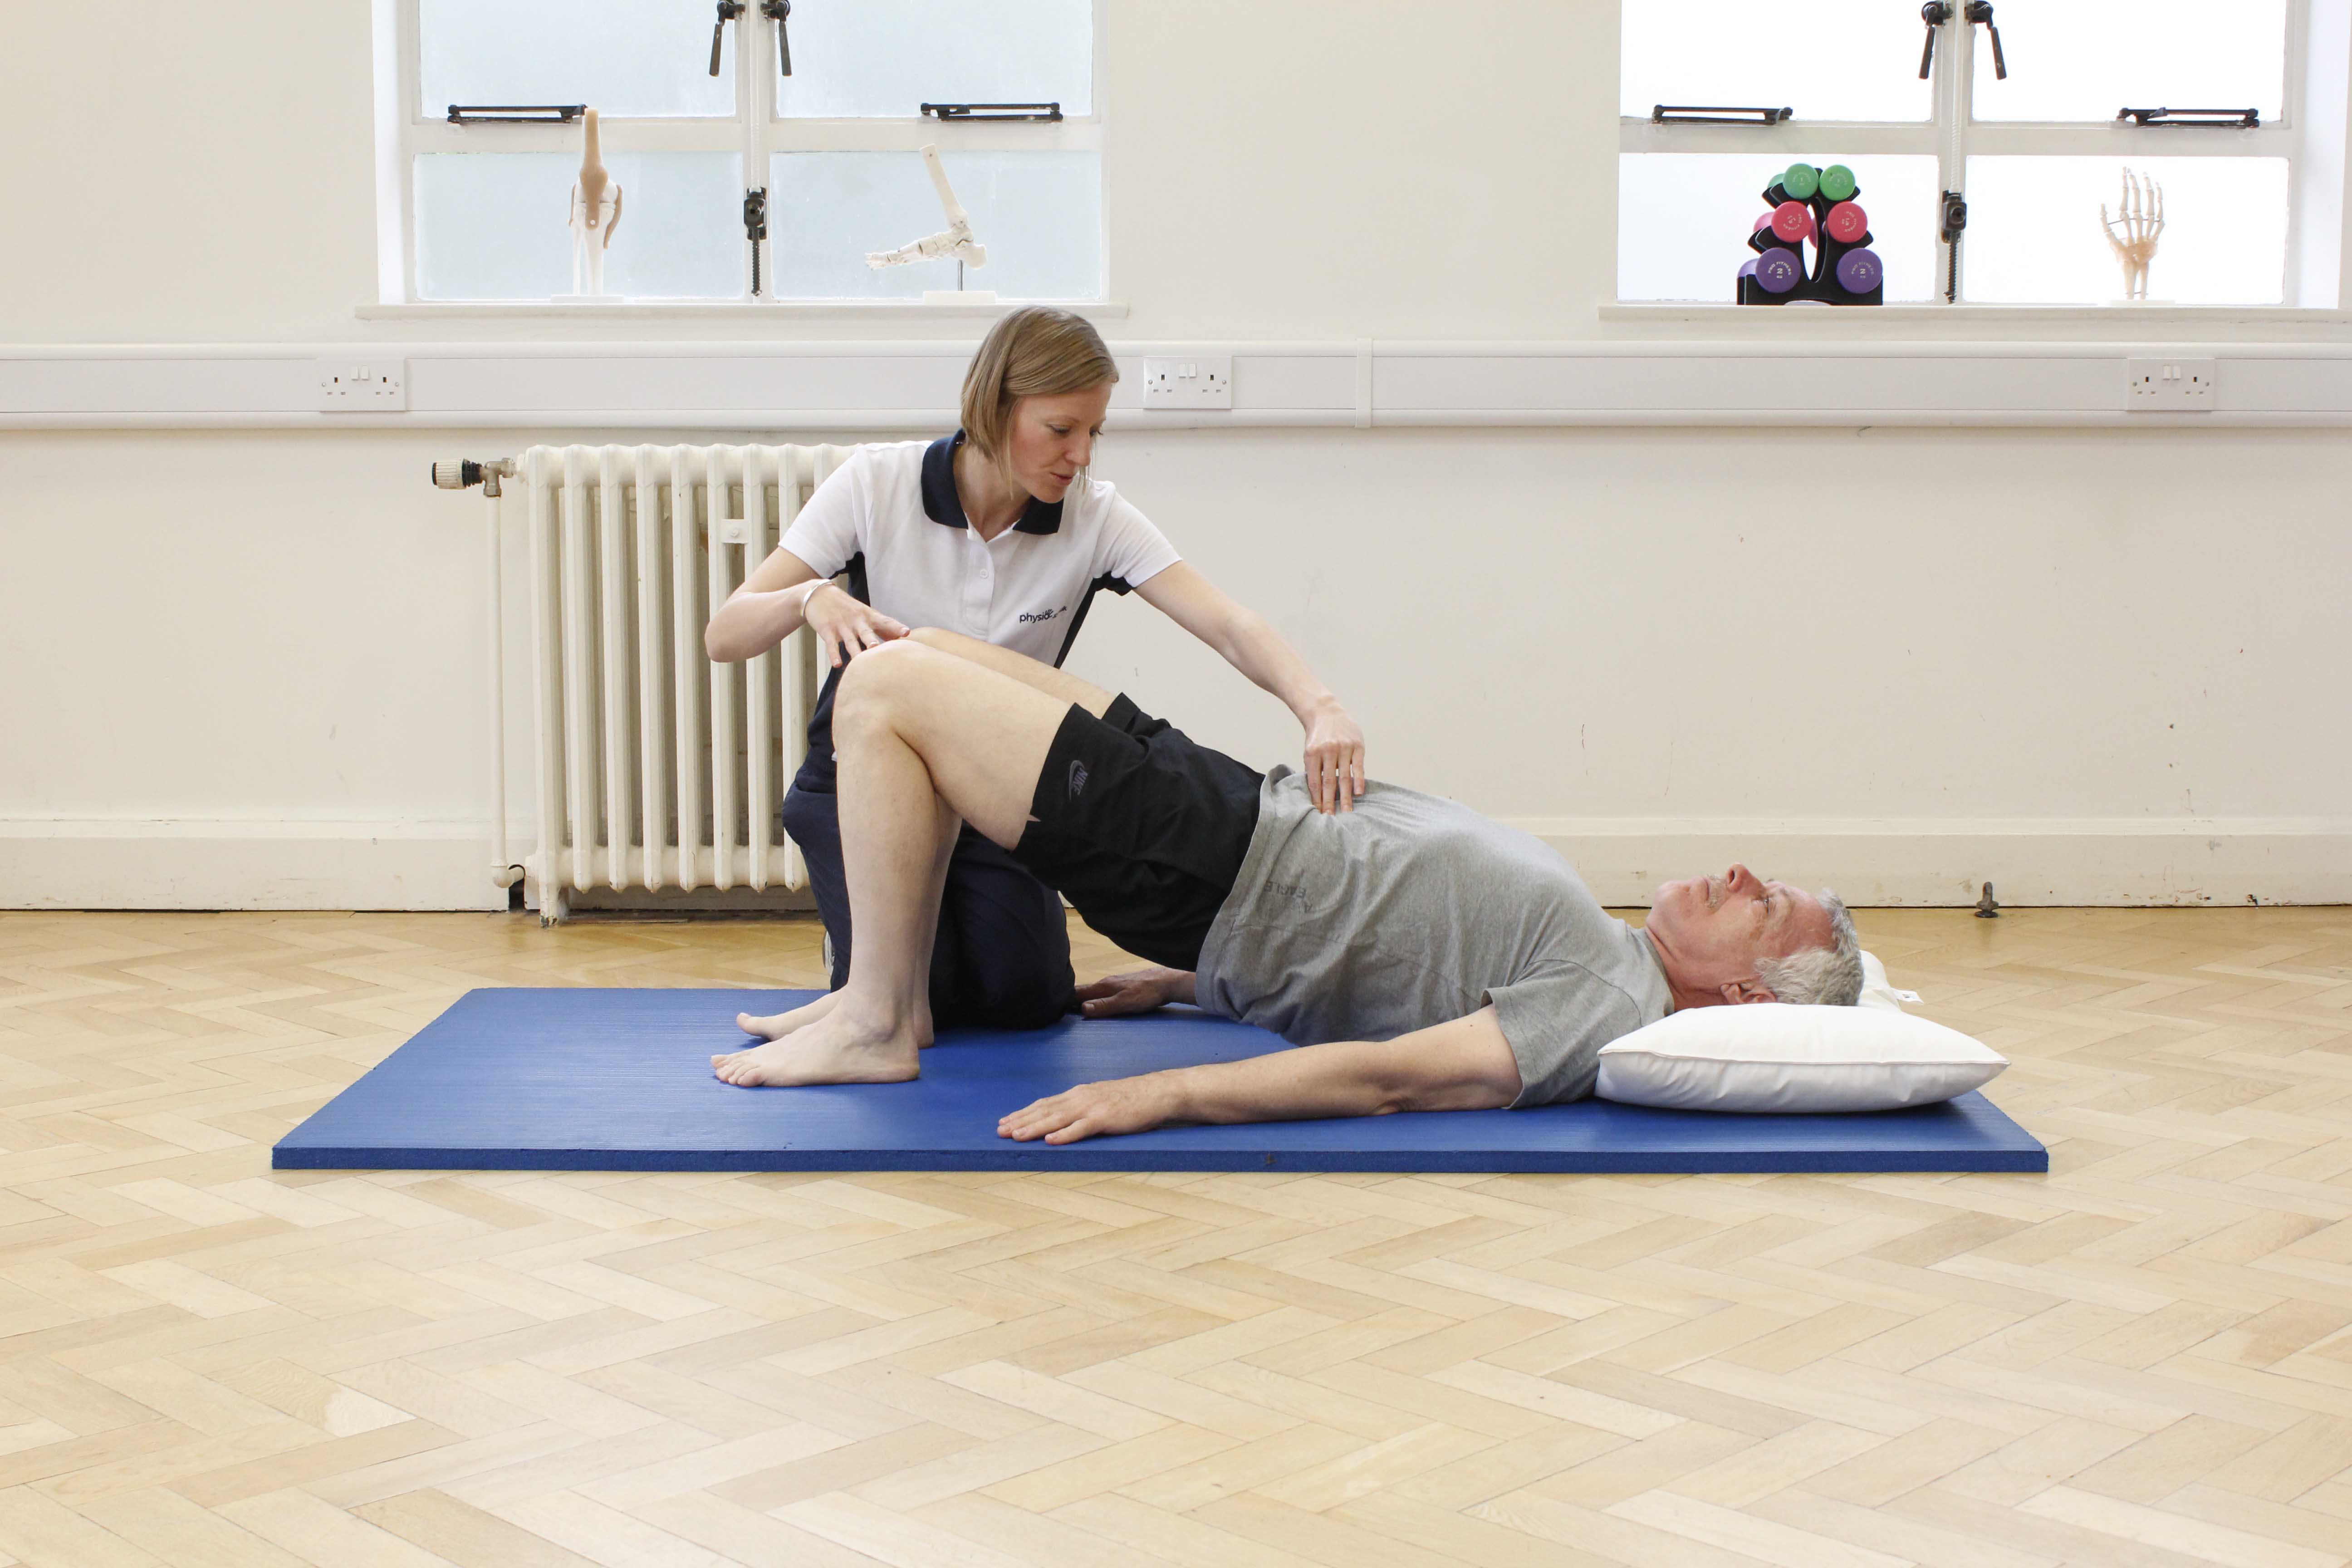 Active cycle of breathing exercises  and postural drainage exercises supervised by a specialist physiotherapist